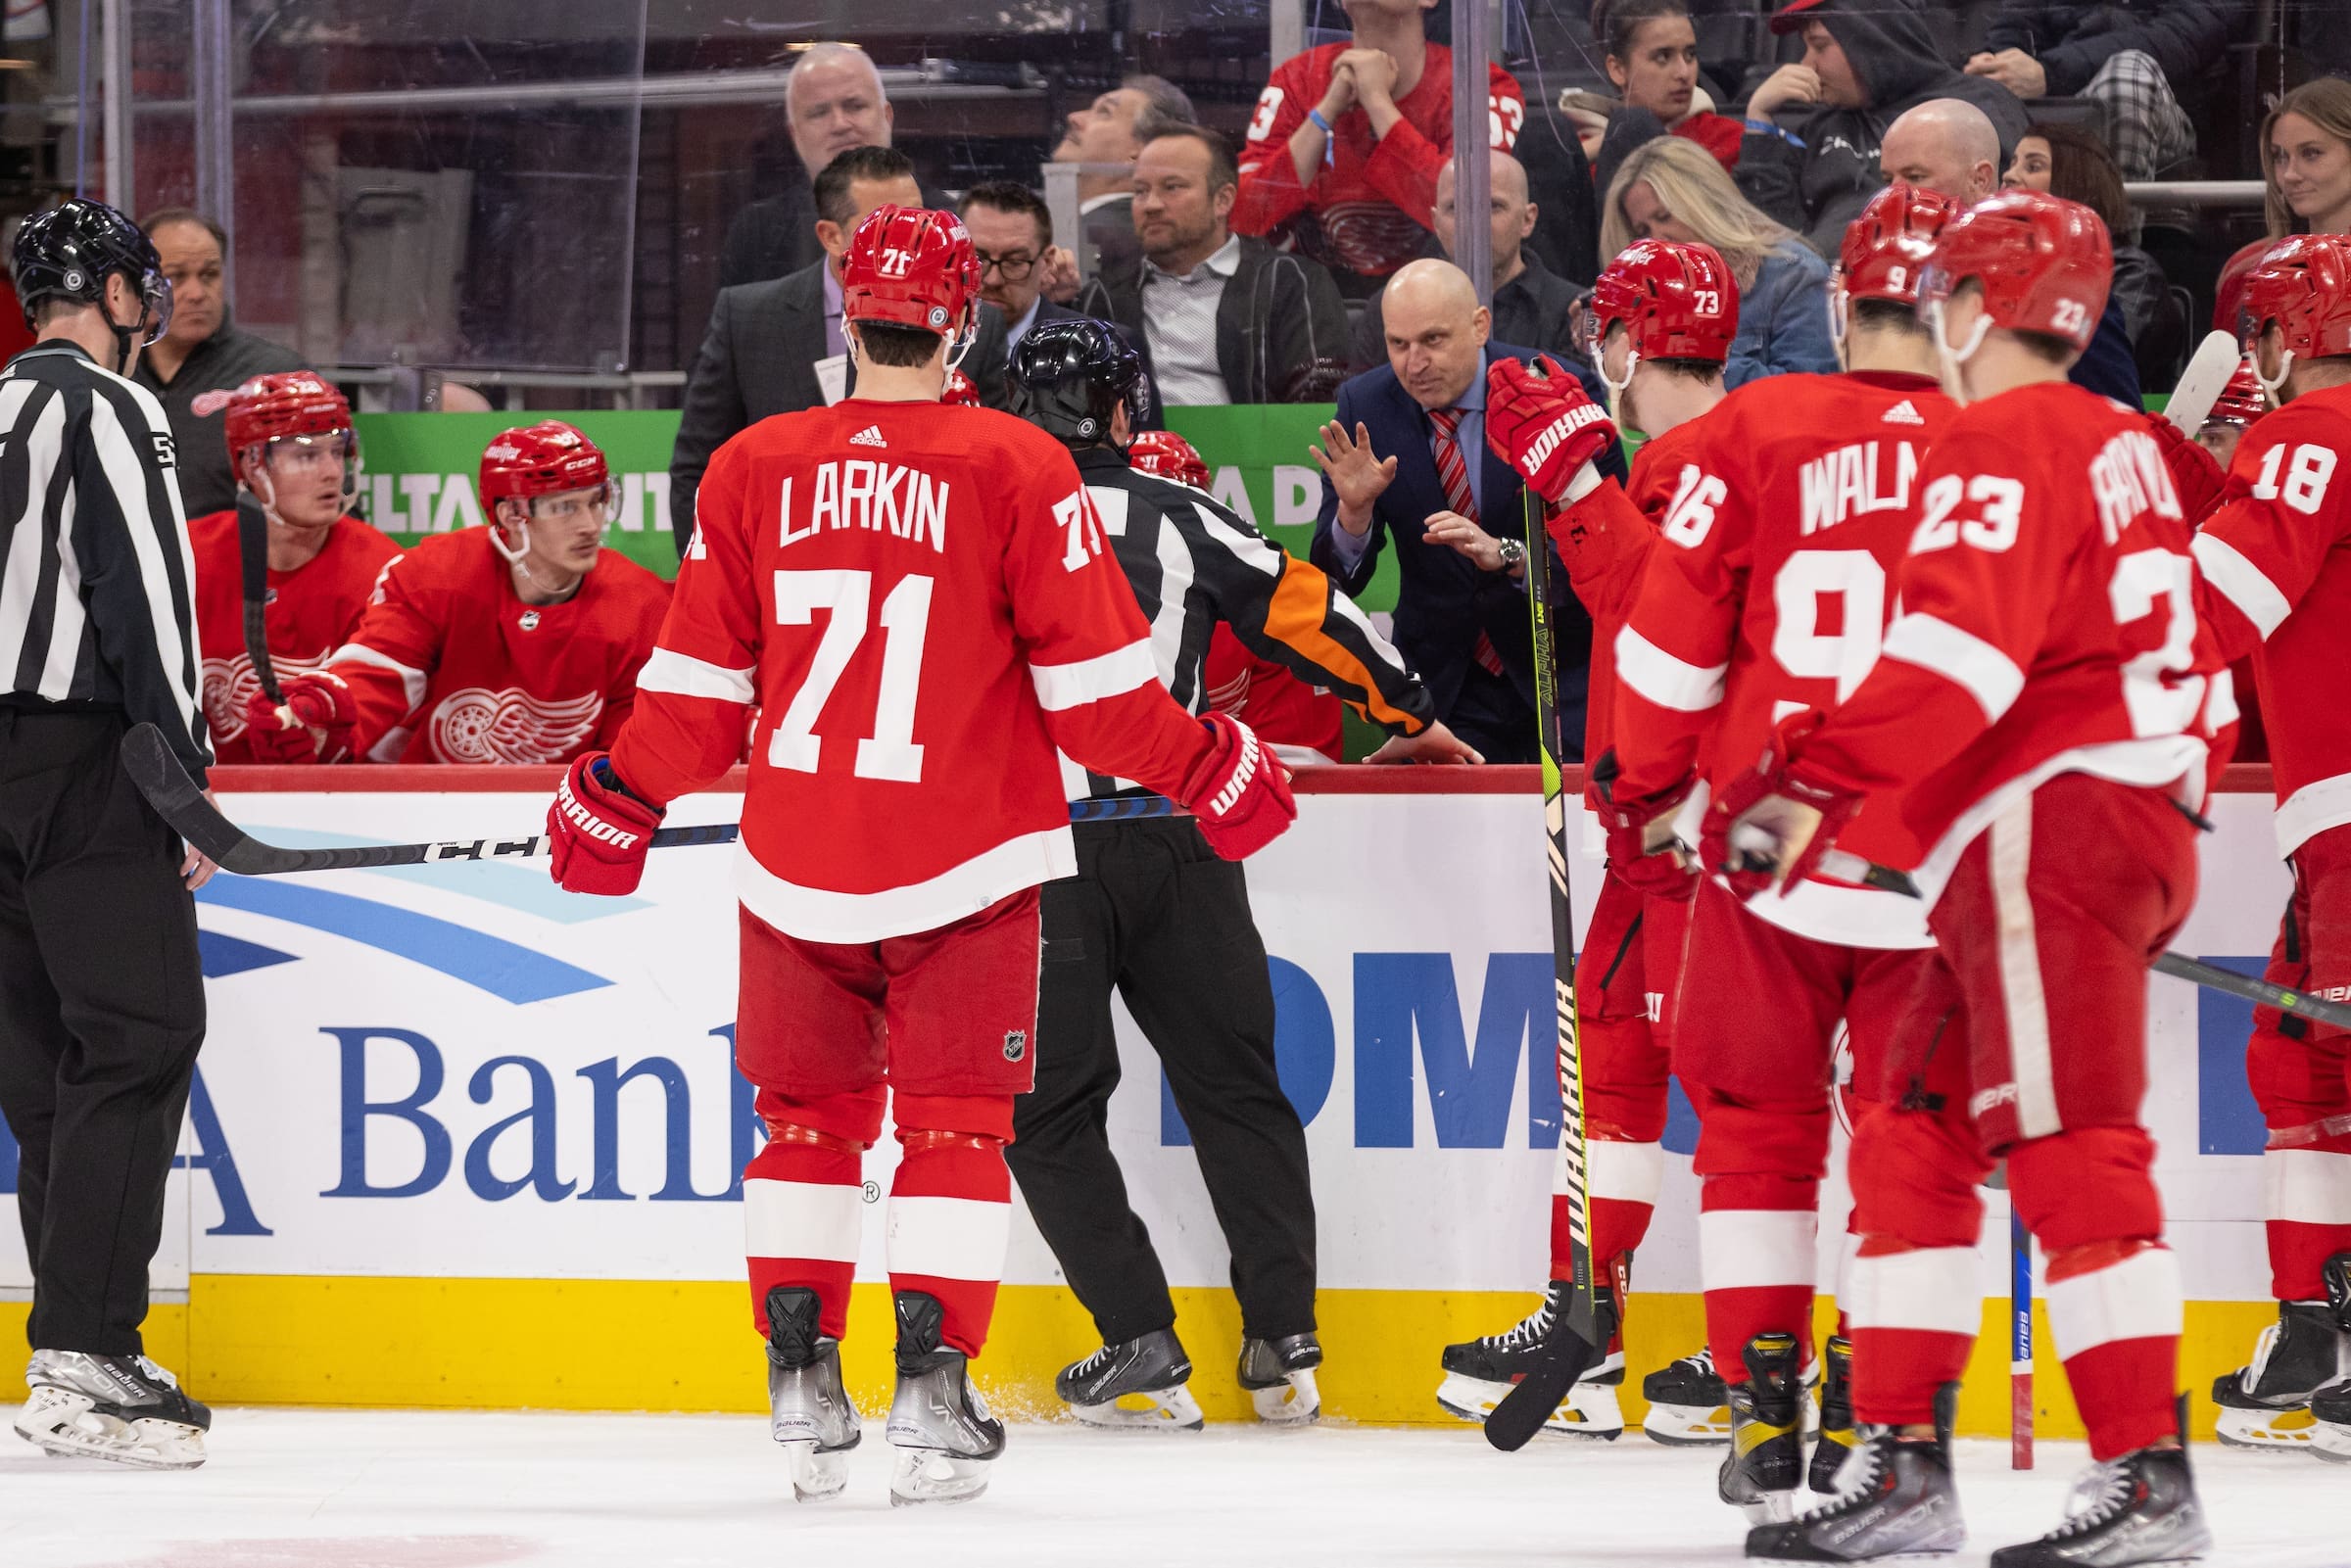 Under Lalonde, Red Wings Often go From Bad to Worse